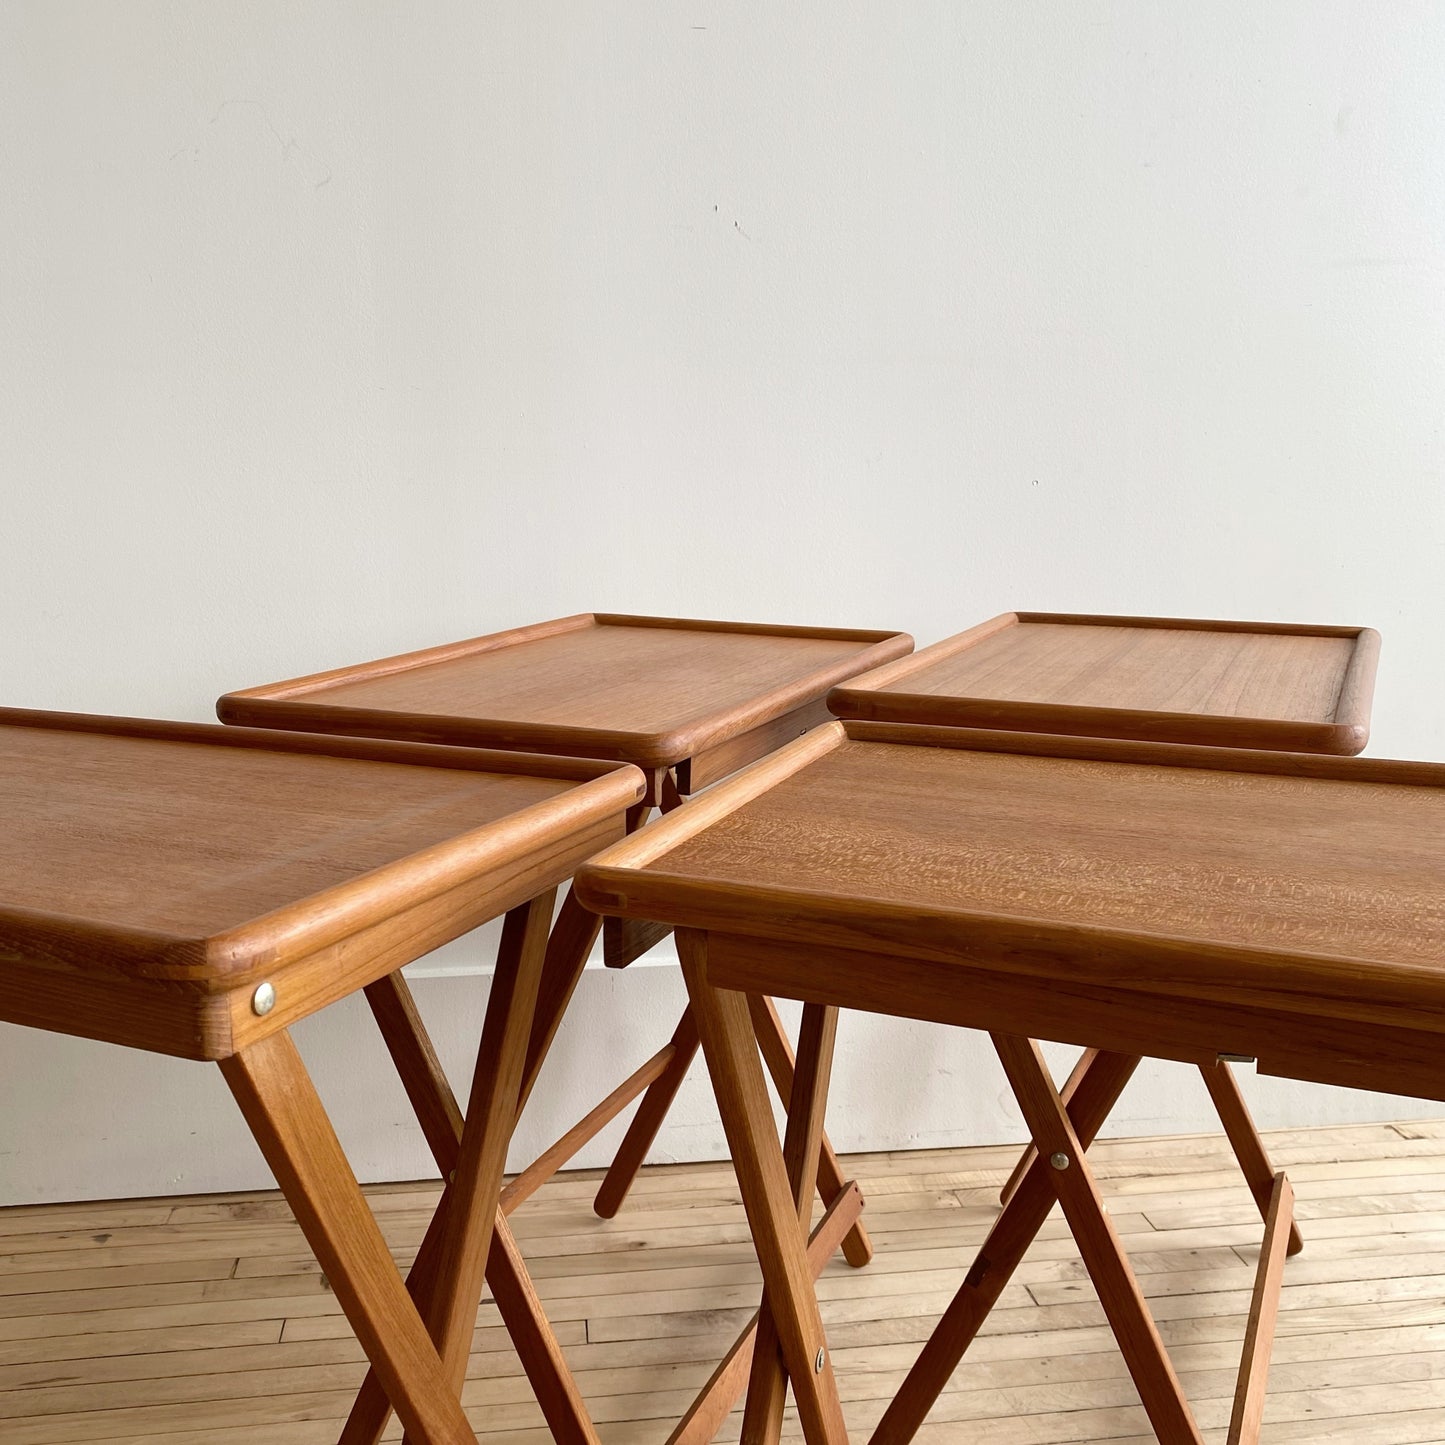 Set of 4 Vintage Teak Folding Trays with Stand